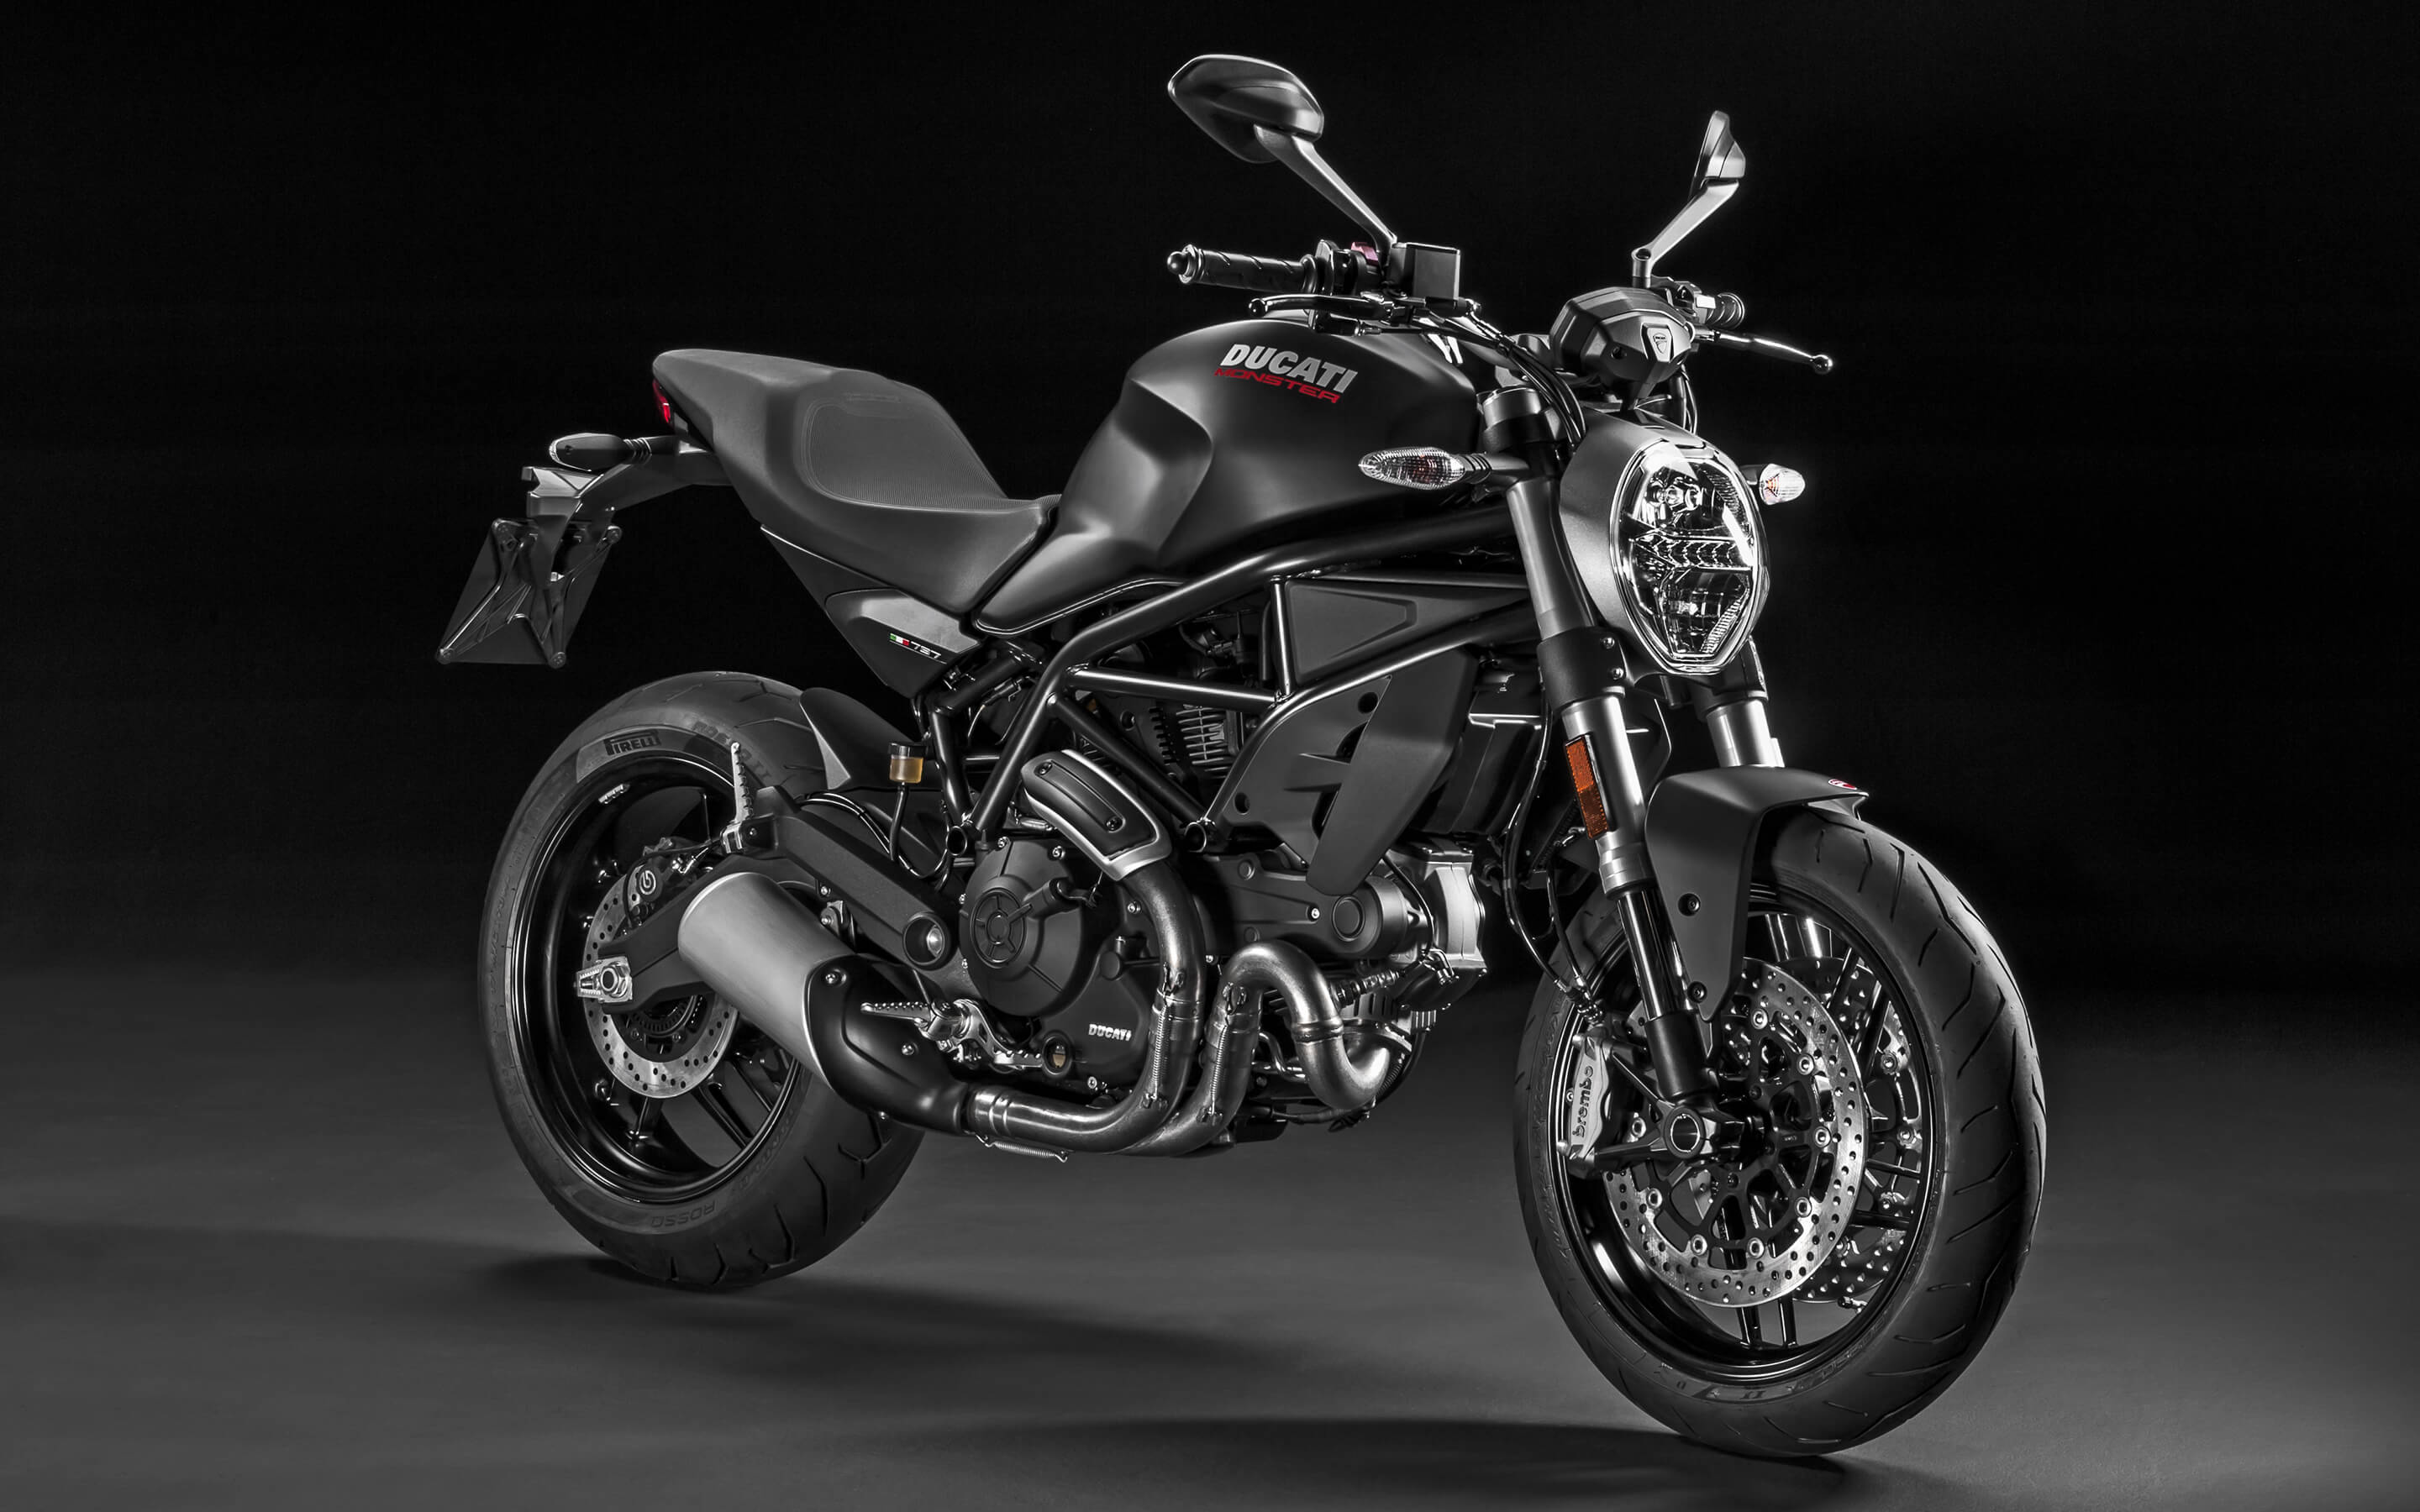 Ducati: Ducati launches two new motorcycles in India, Auto ...